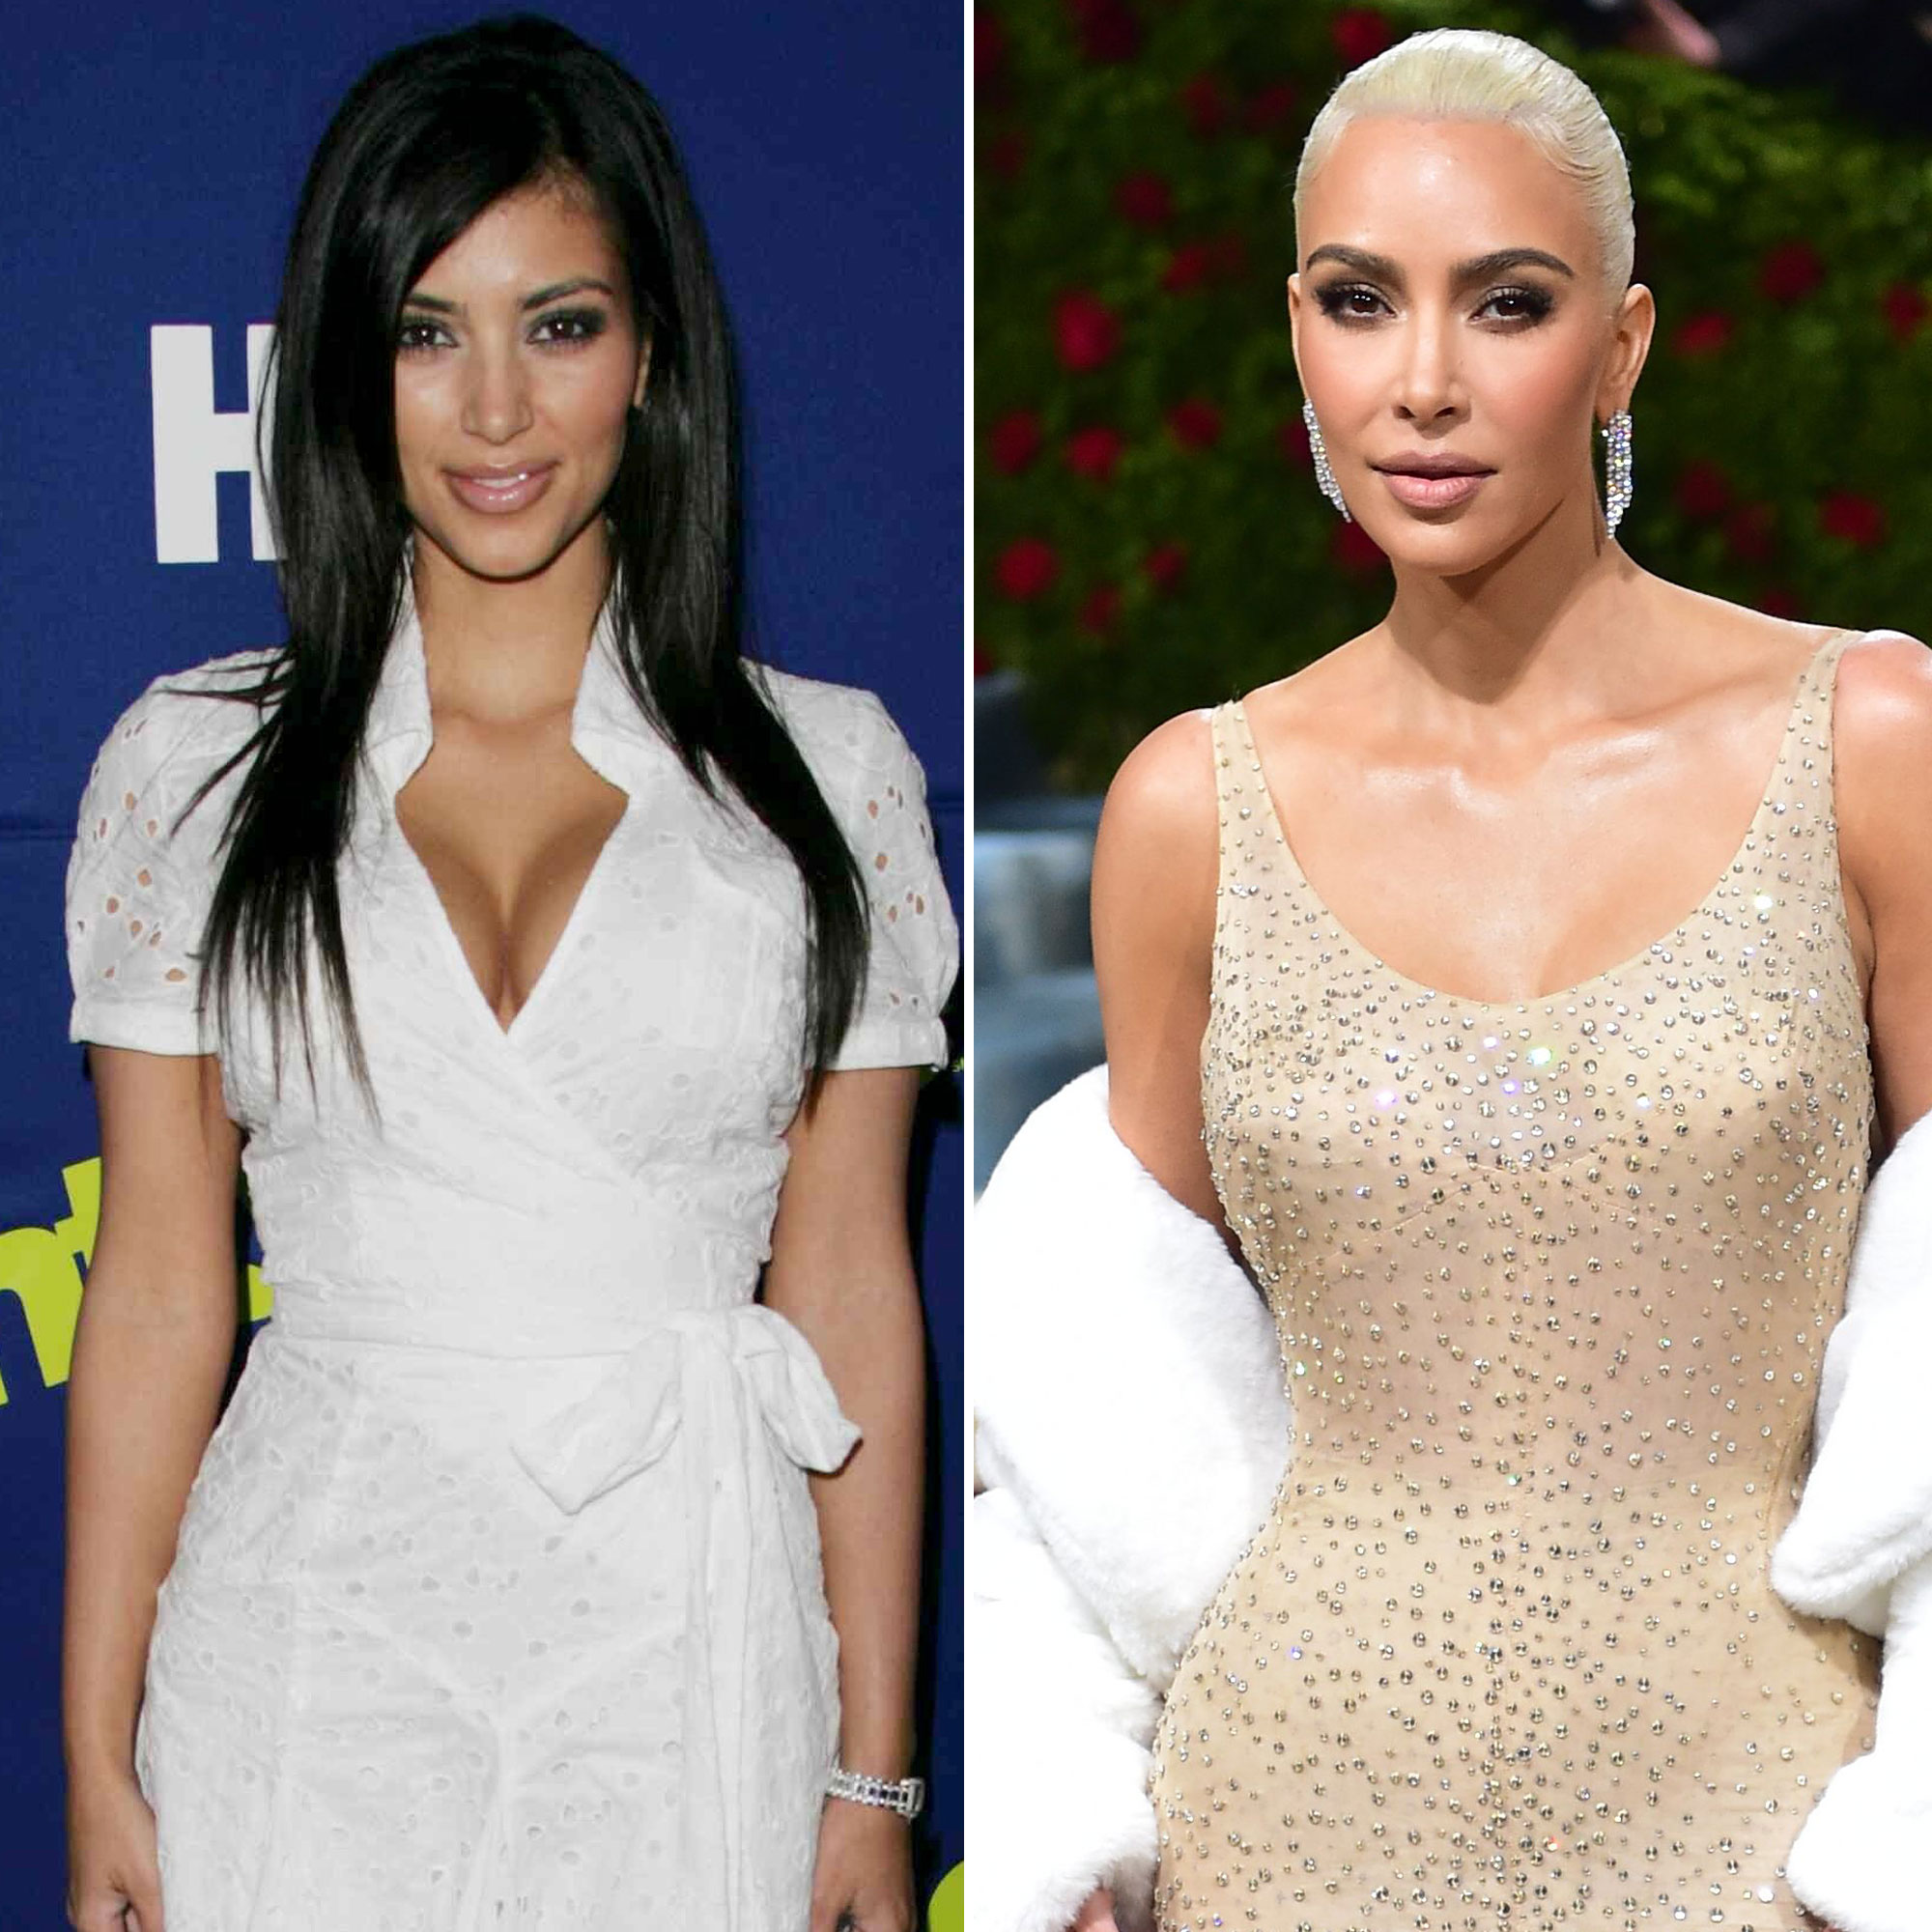 Celebrity Plastic Surgery Reveals and Beauty Confessions of 2022